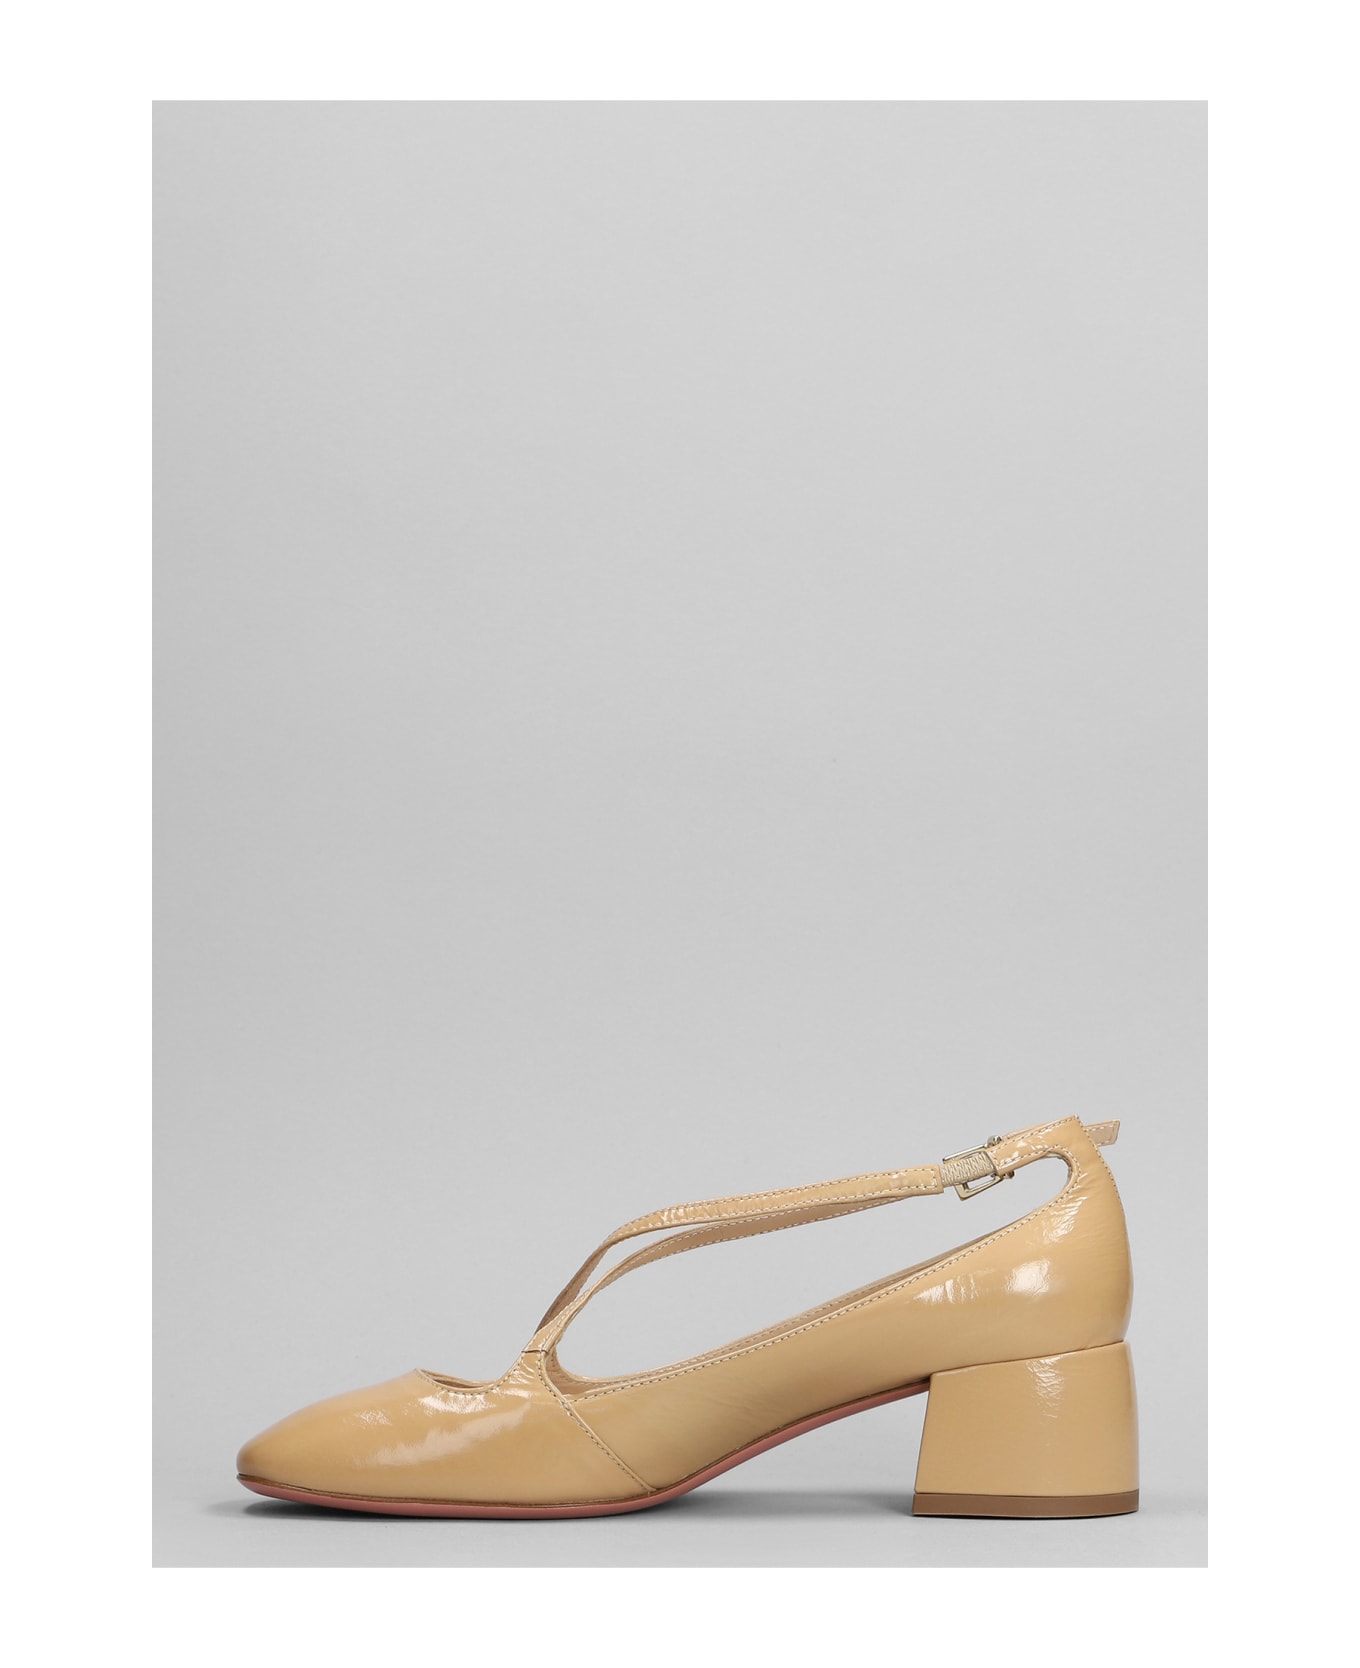 Roberto Festa Actress Pumps In Camel Leather - Camel ハイヒール